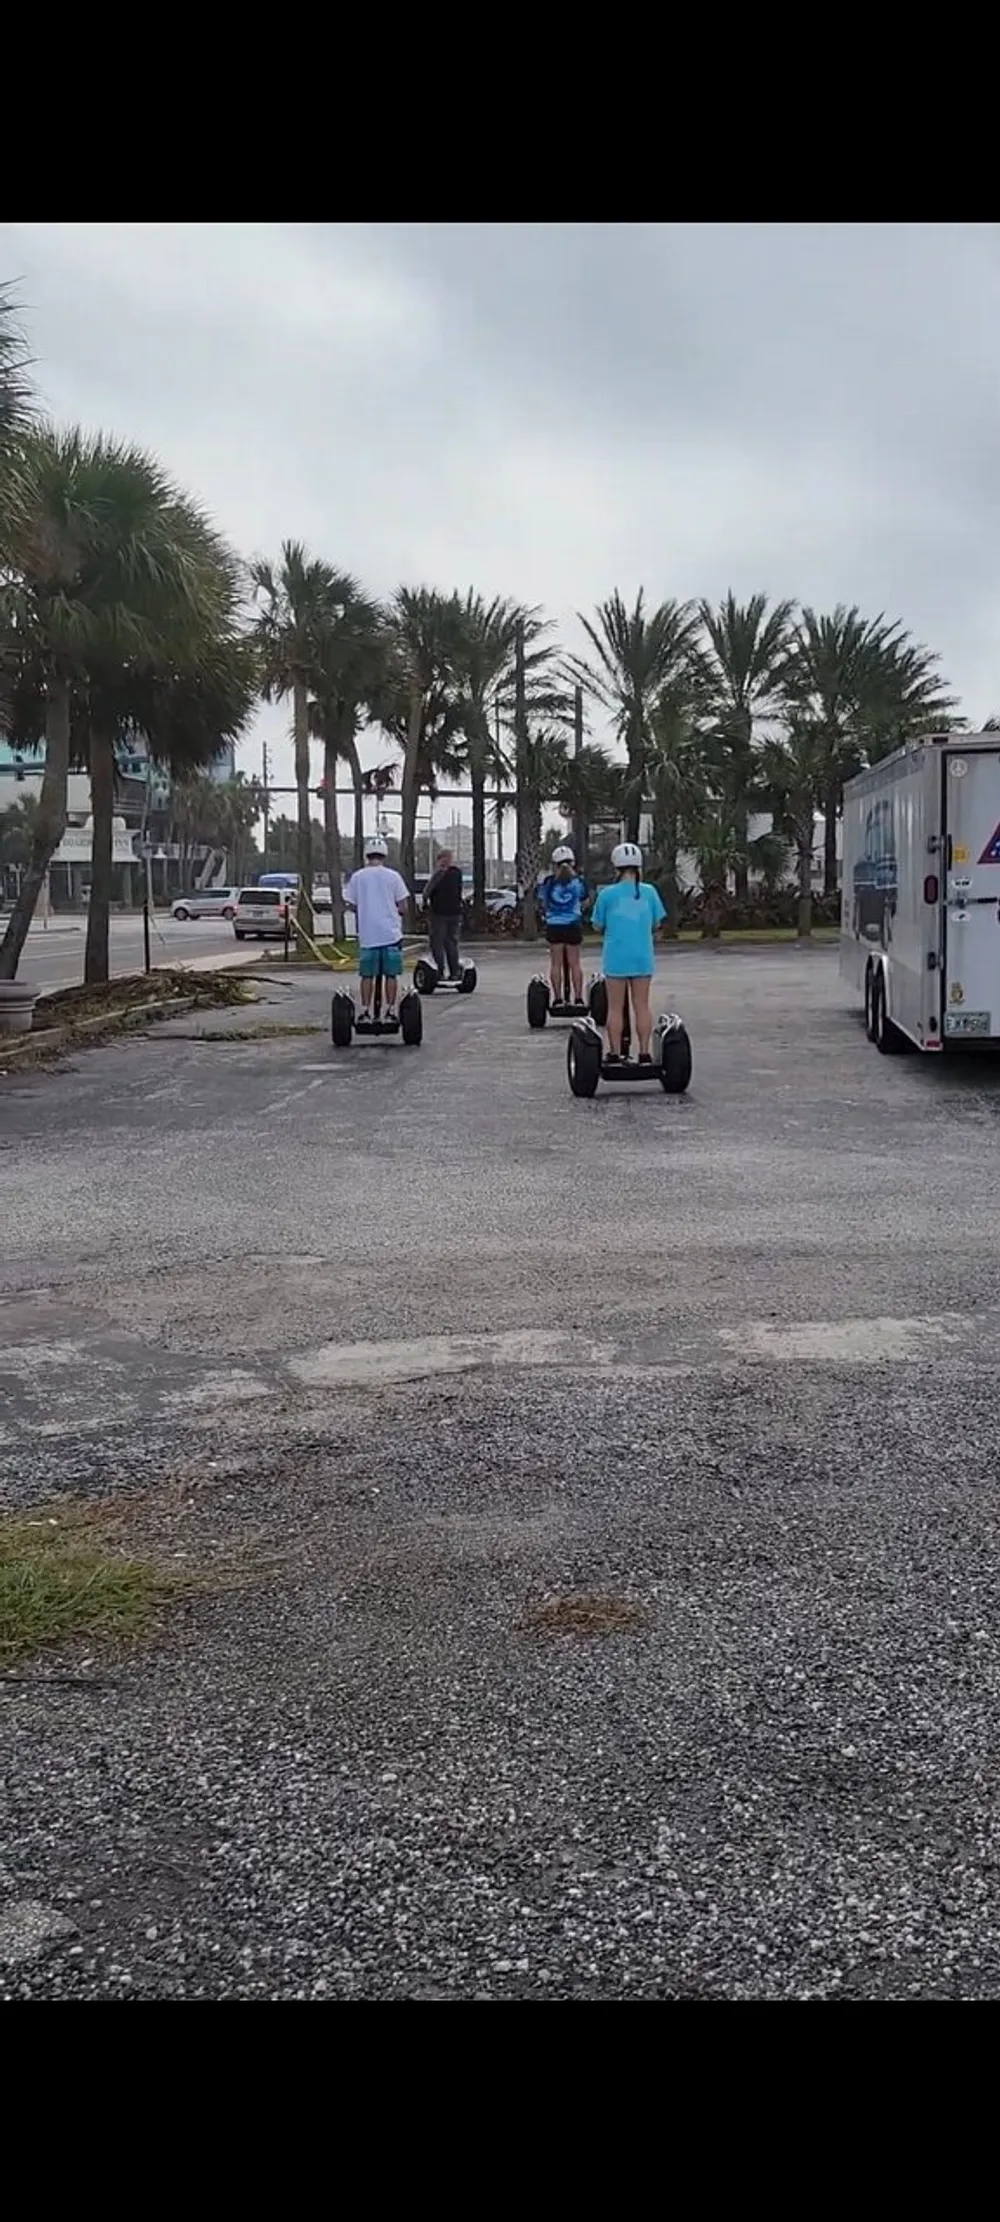 A group of people is riding Segways along a palm-lined street under an overcast sky